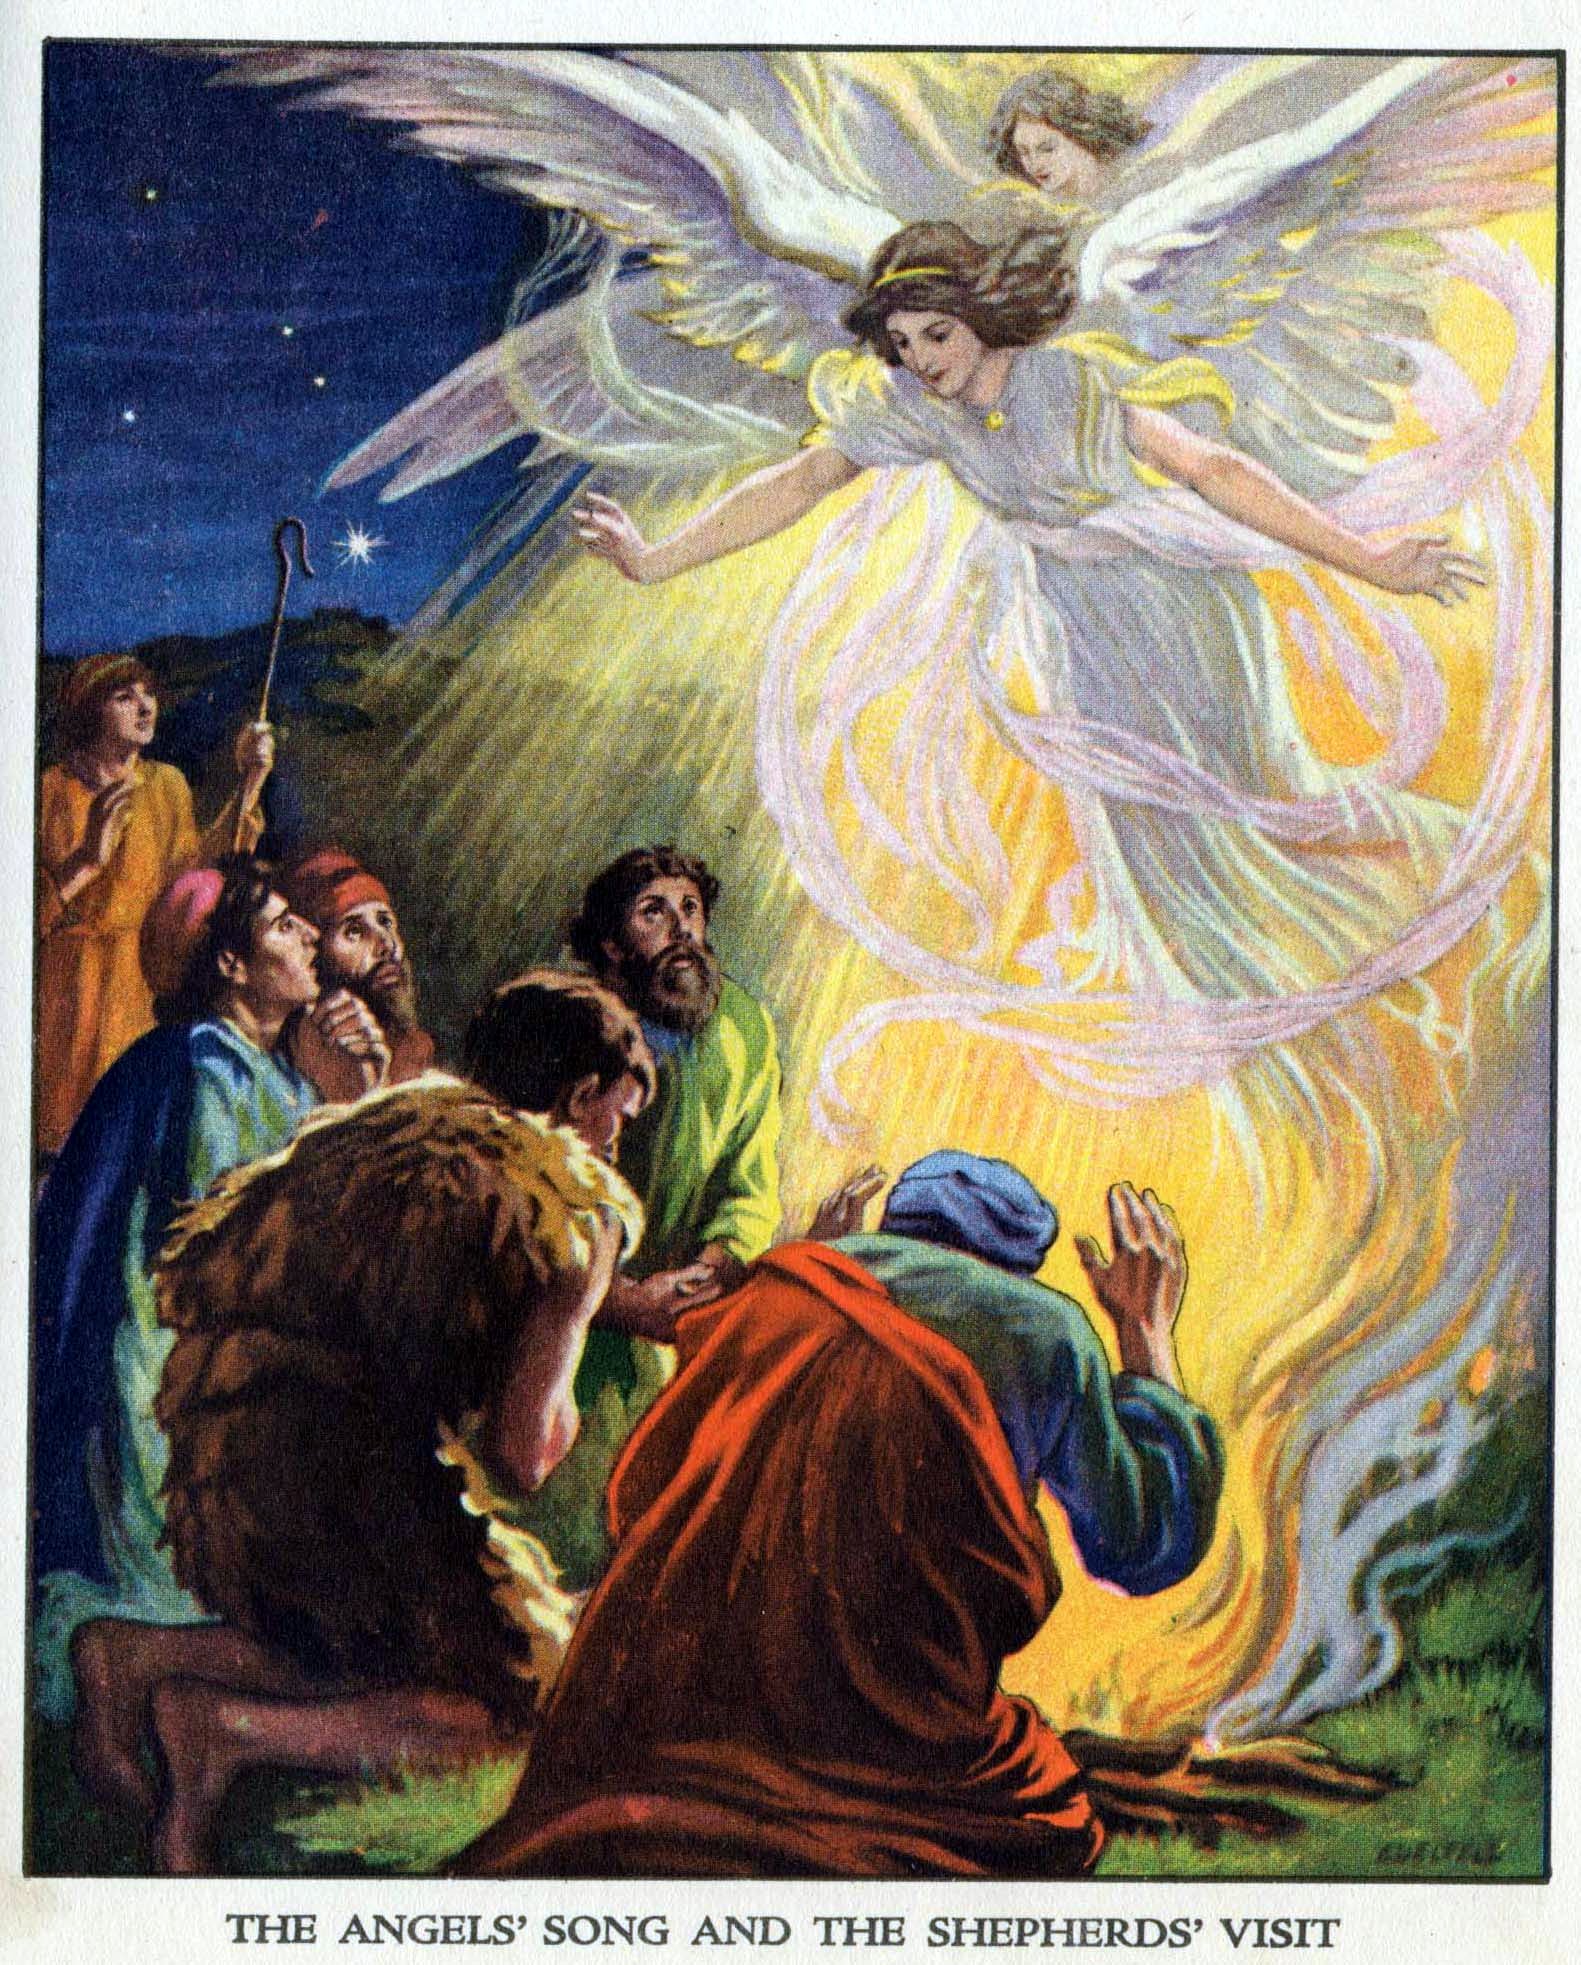 The angels' song and the shepherds' visit